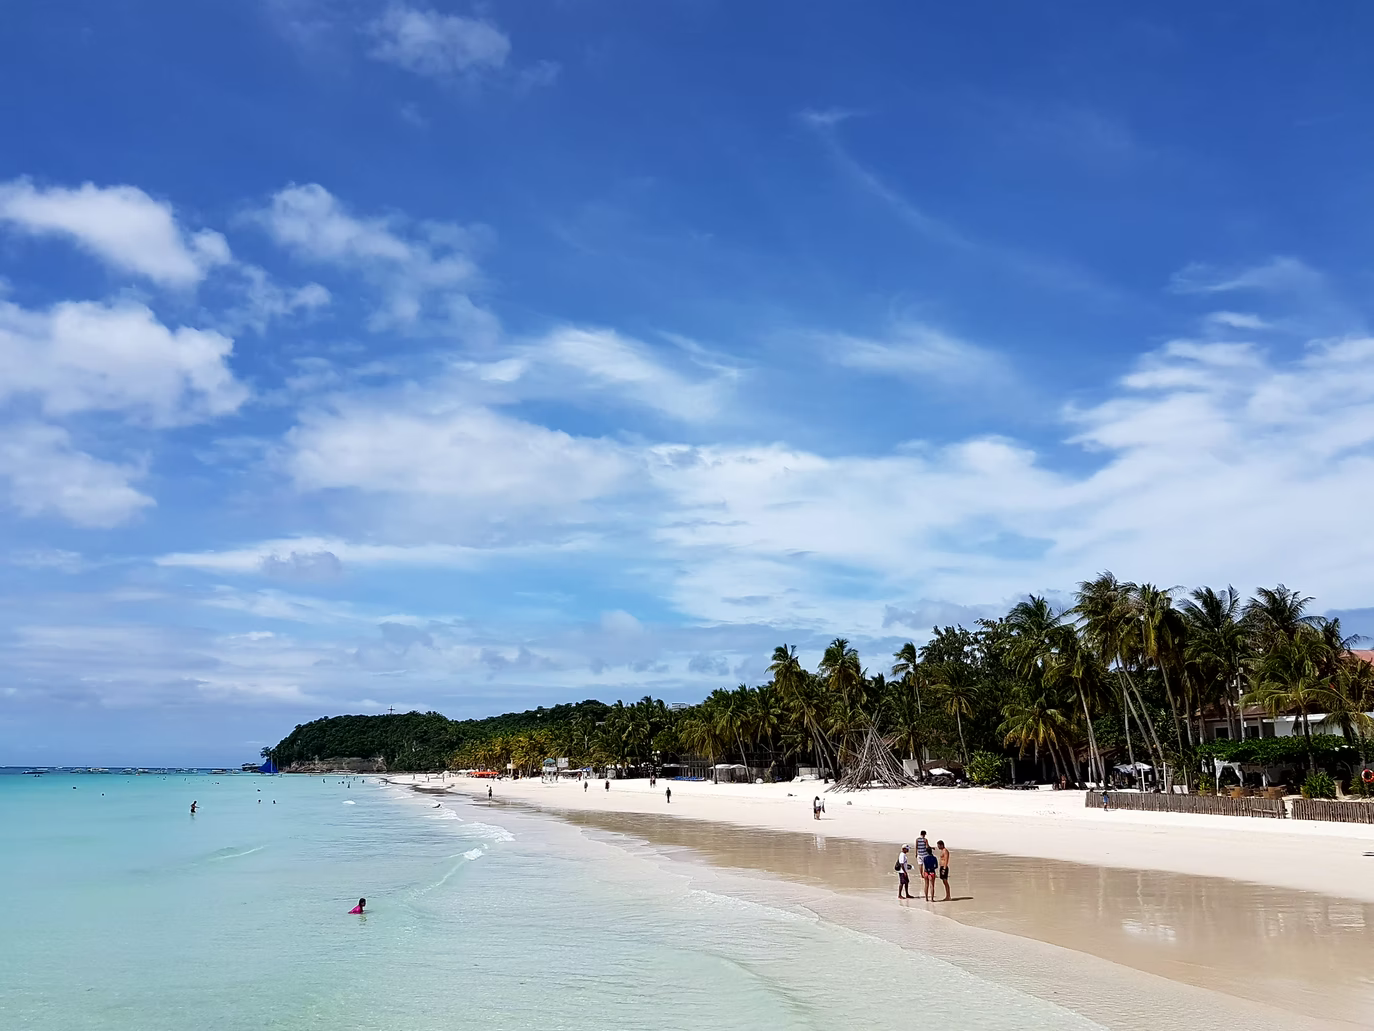 requirements for travel in boracay